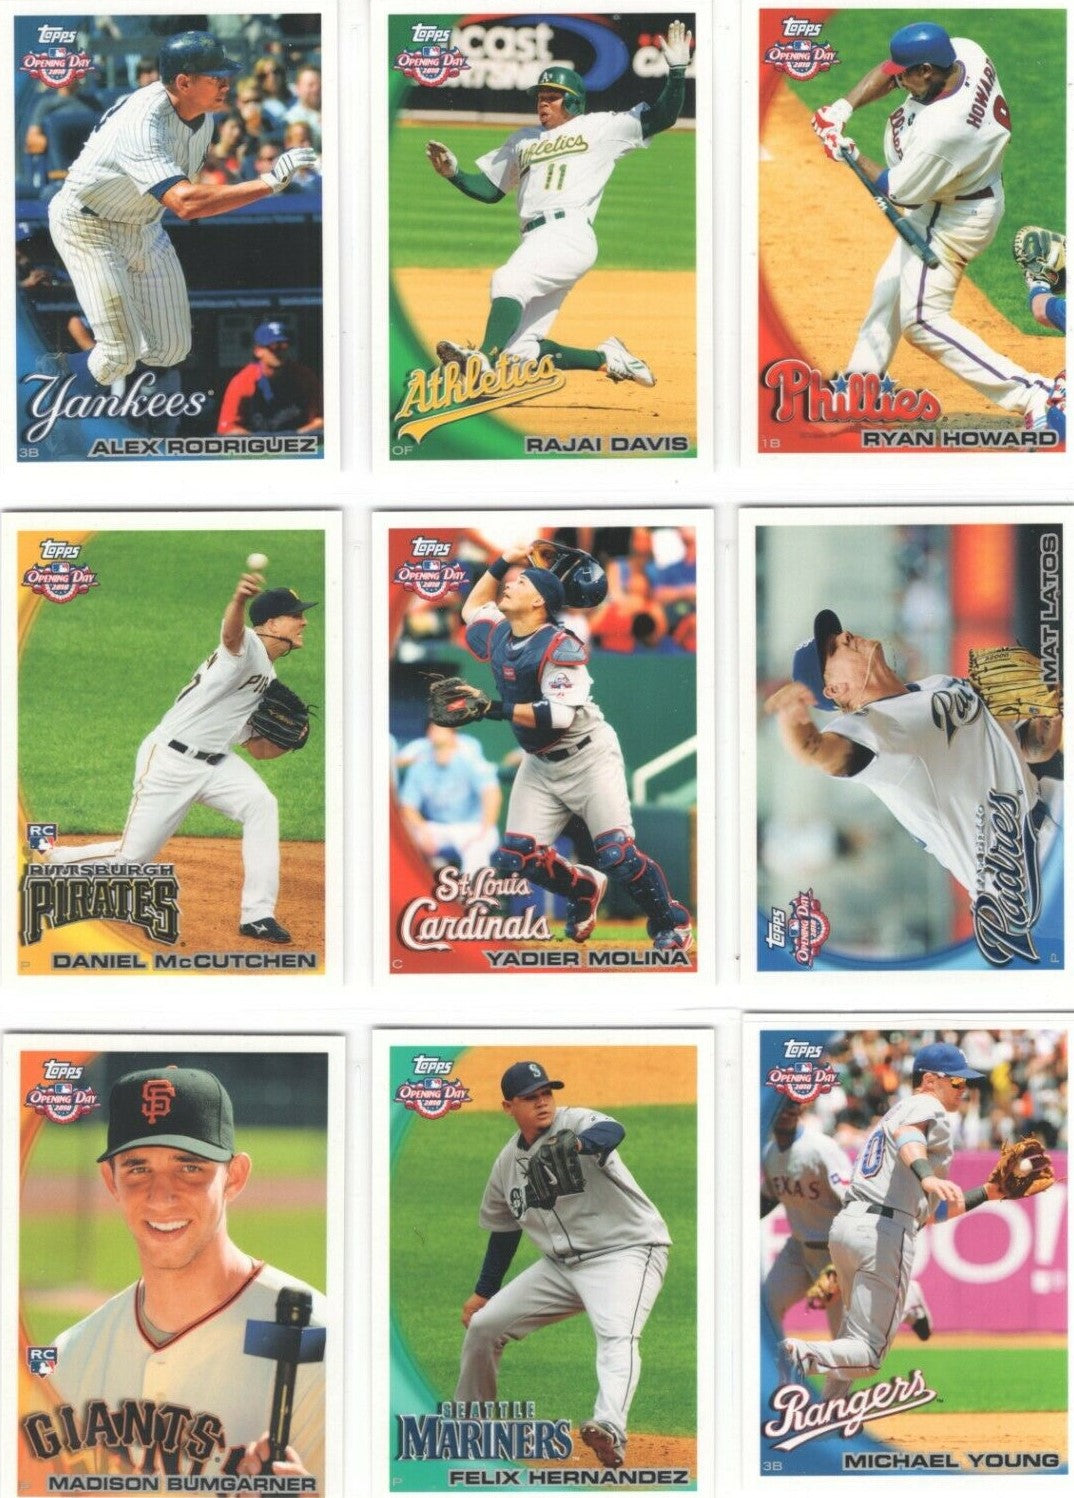 2010 Topps Opening Day Baseball Series Complete Mint Set with Madison